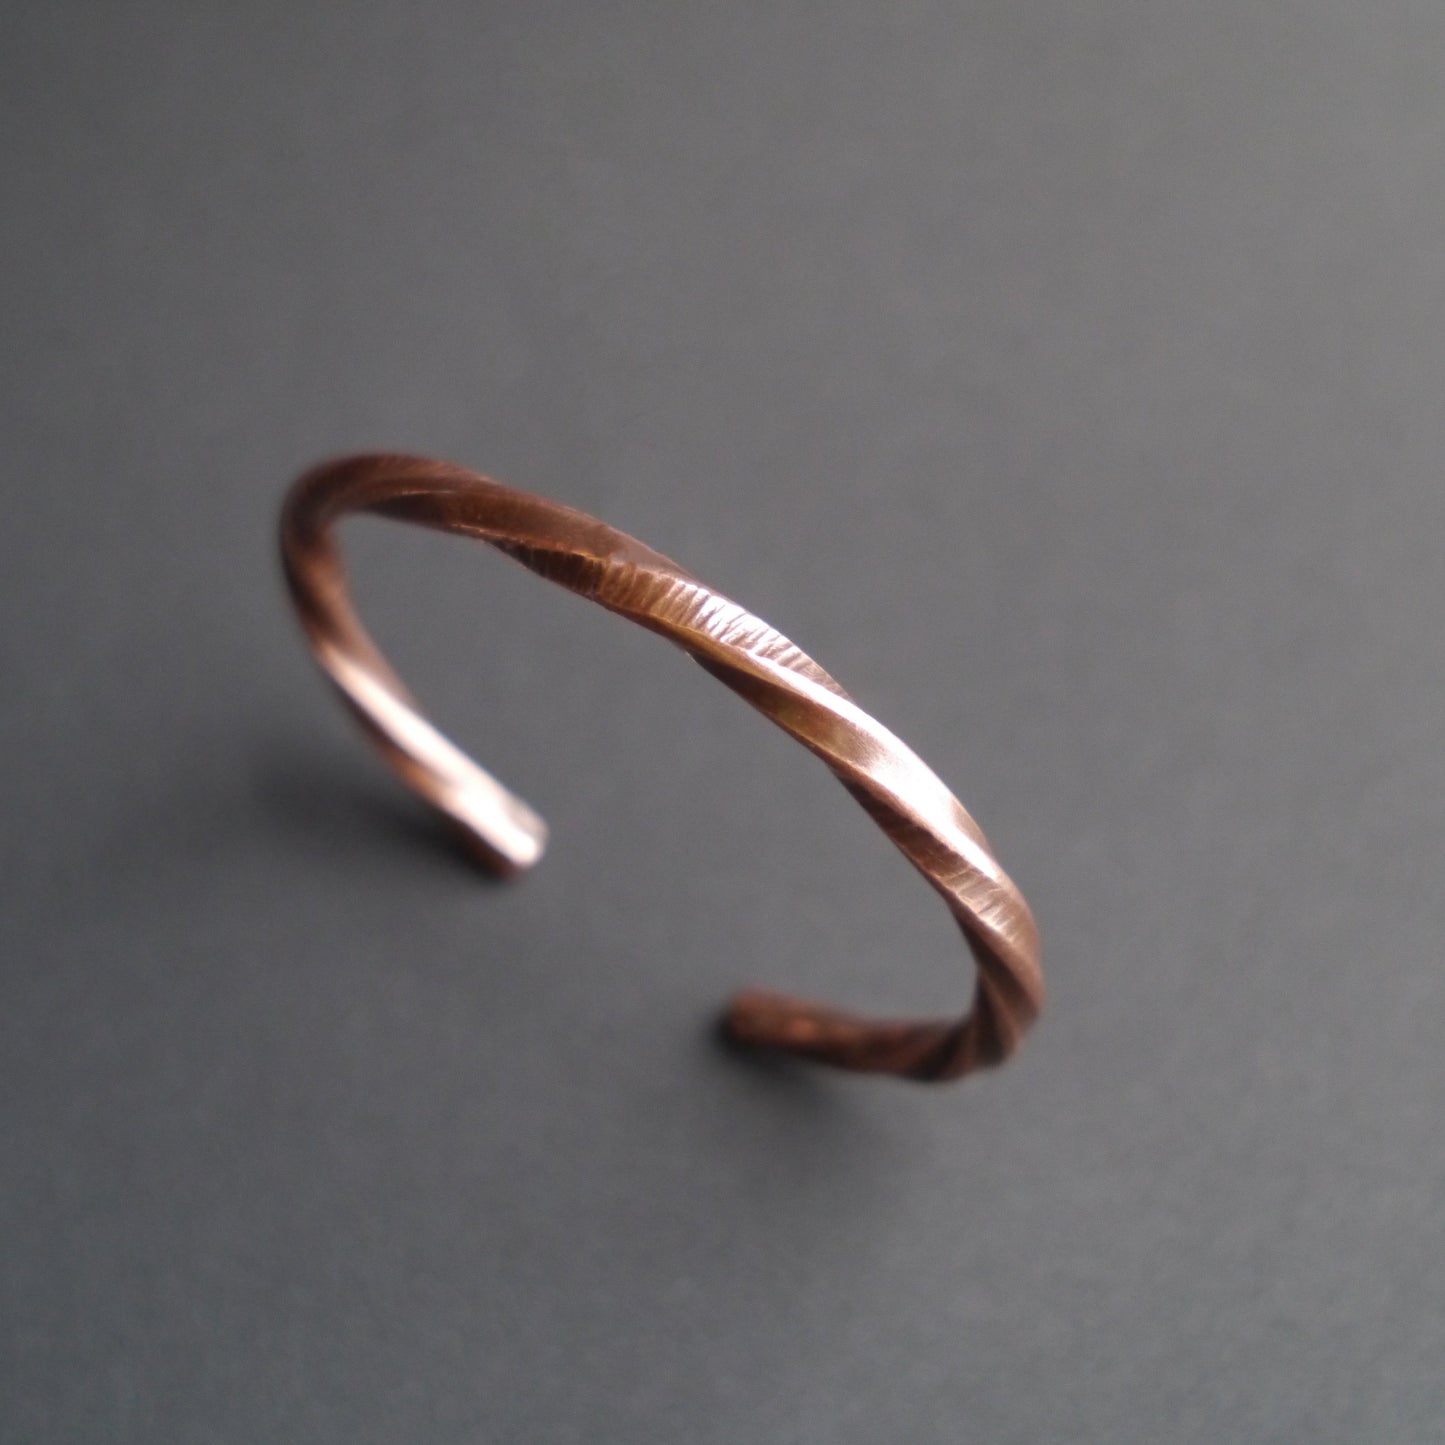 Twisted Rustic Cuff in 5mm Recycled Copper